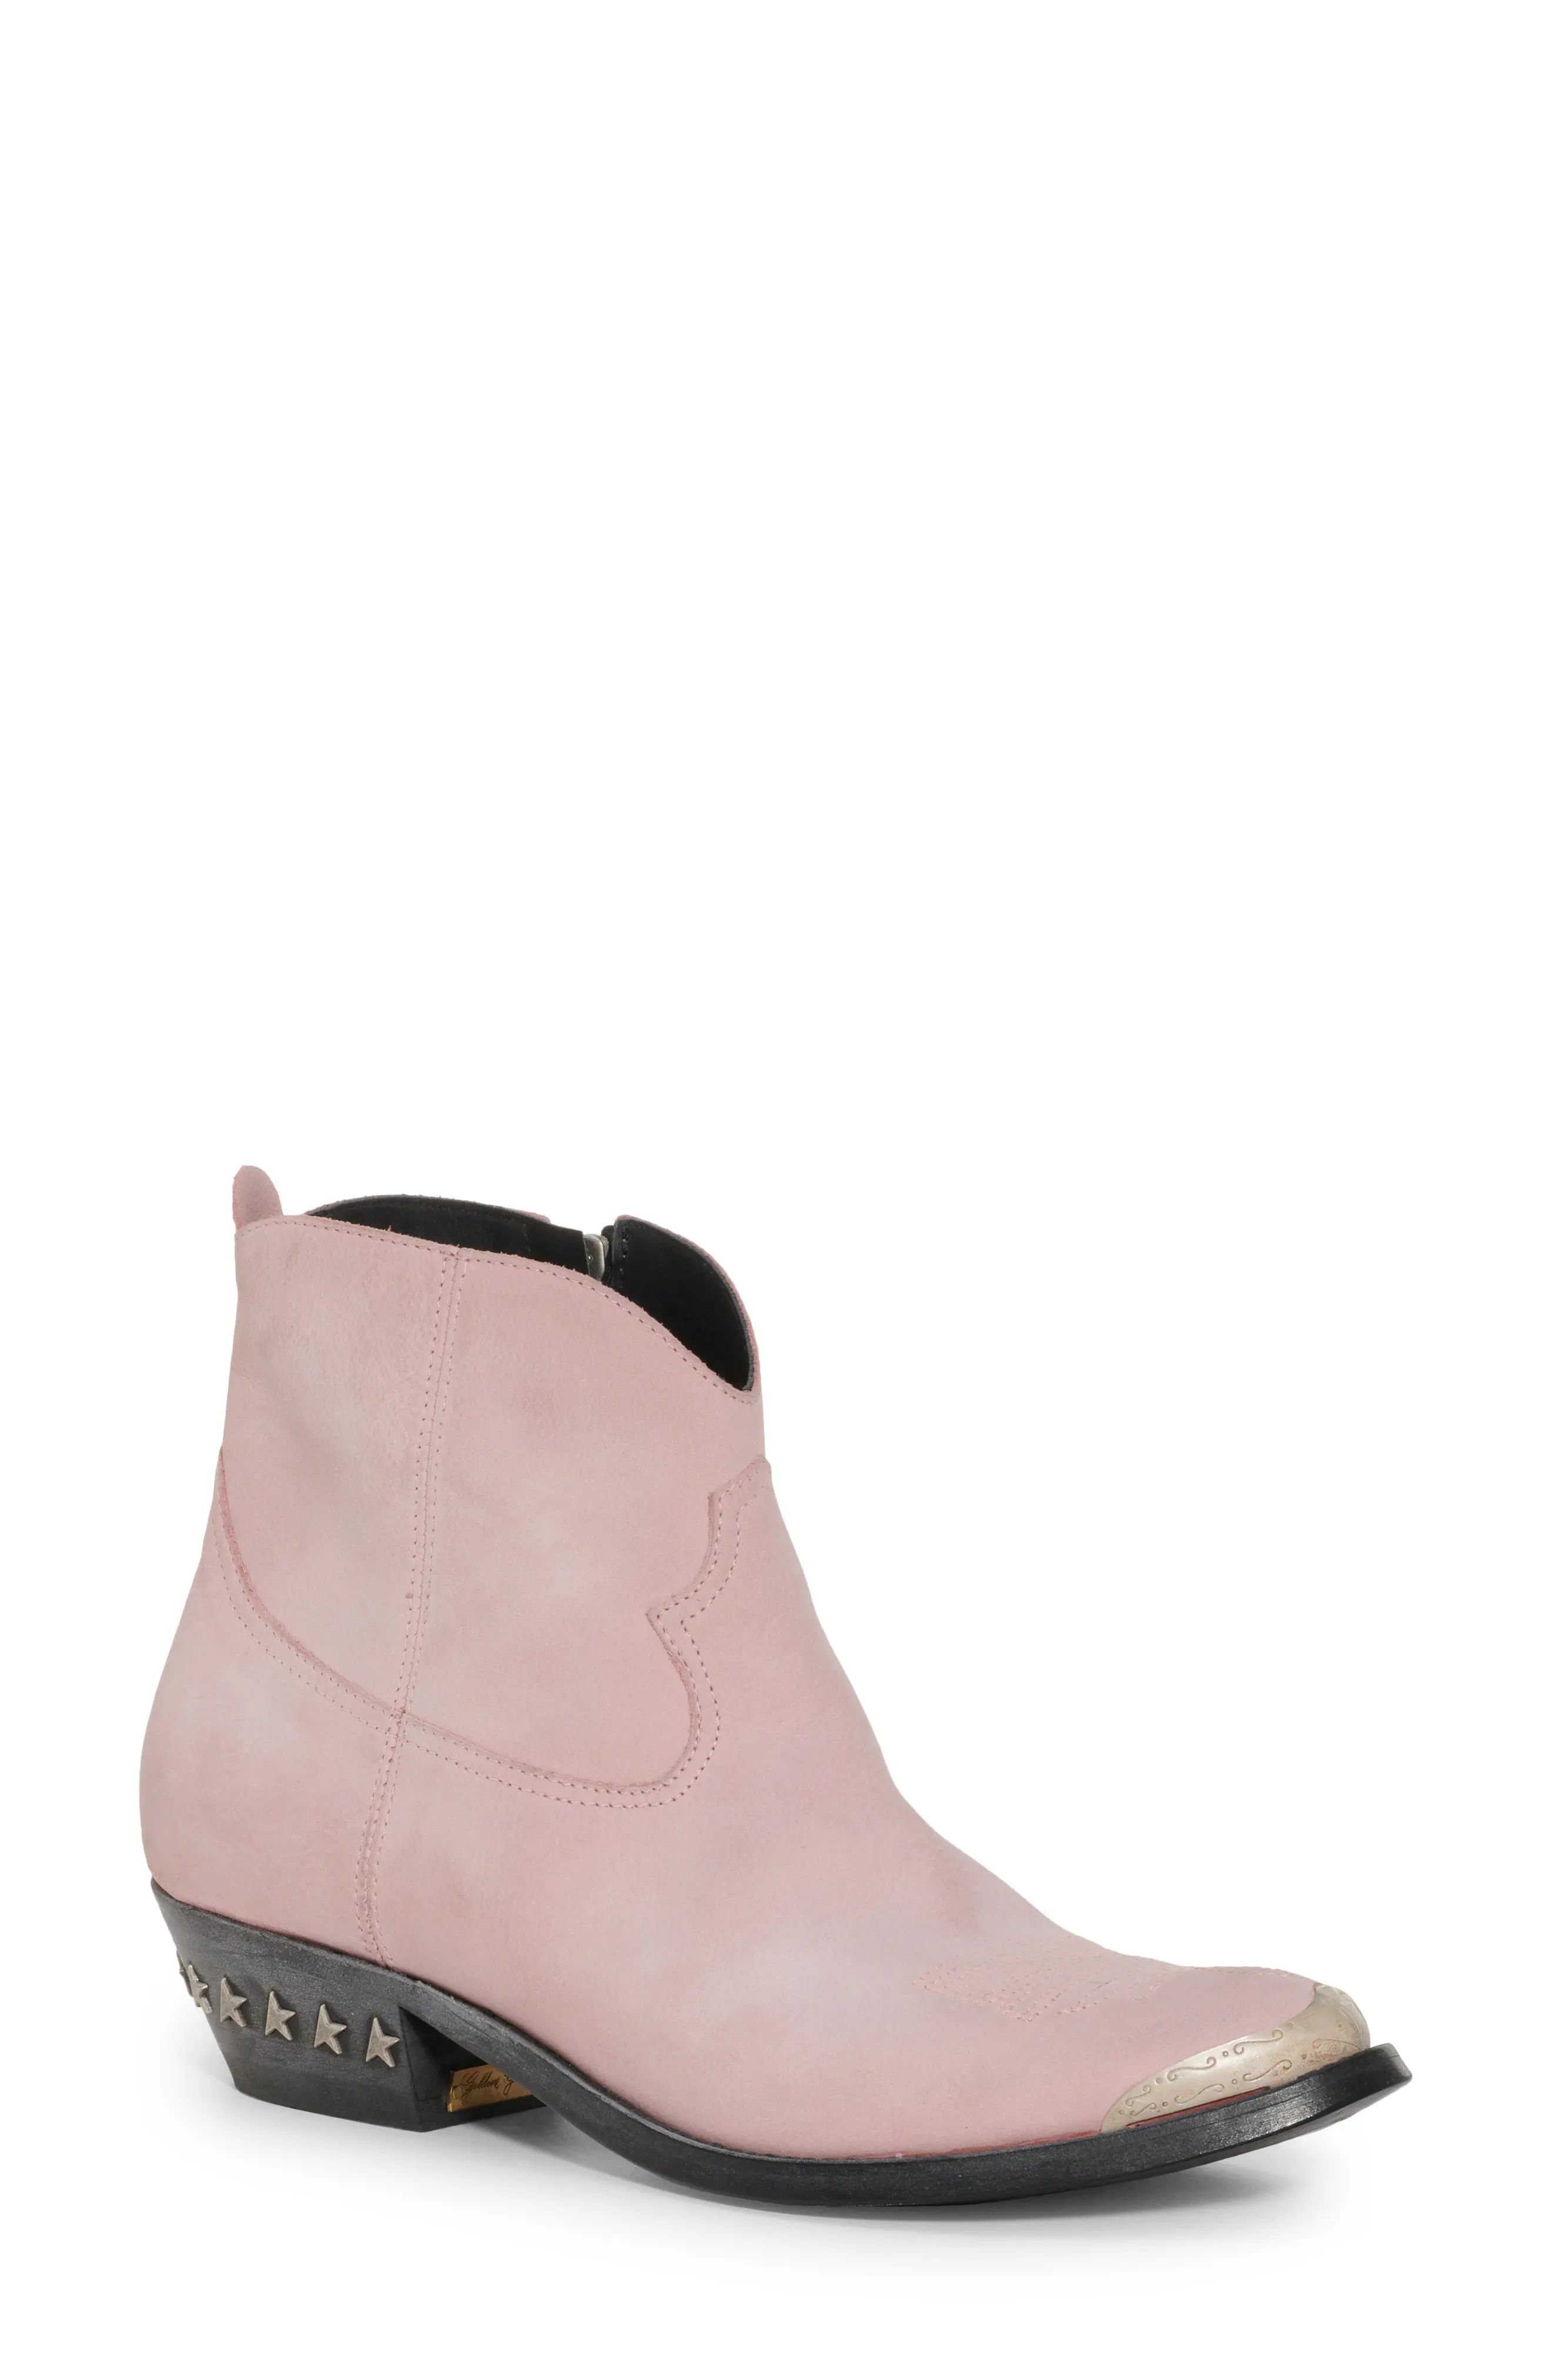 Golden Goose Young Western Boot in Baby Pink at Nordstrom, Size 11Us | Nordstrom